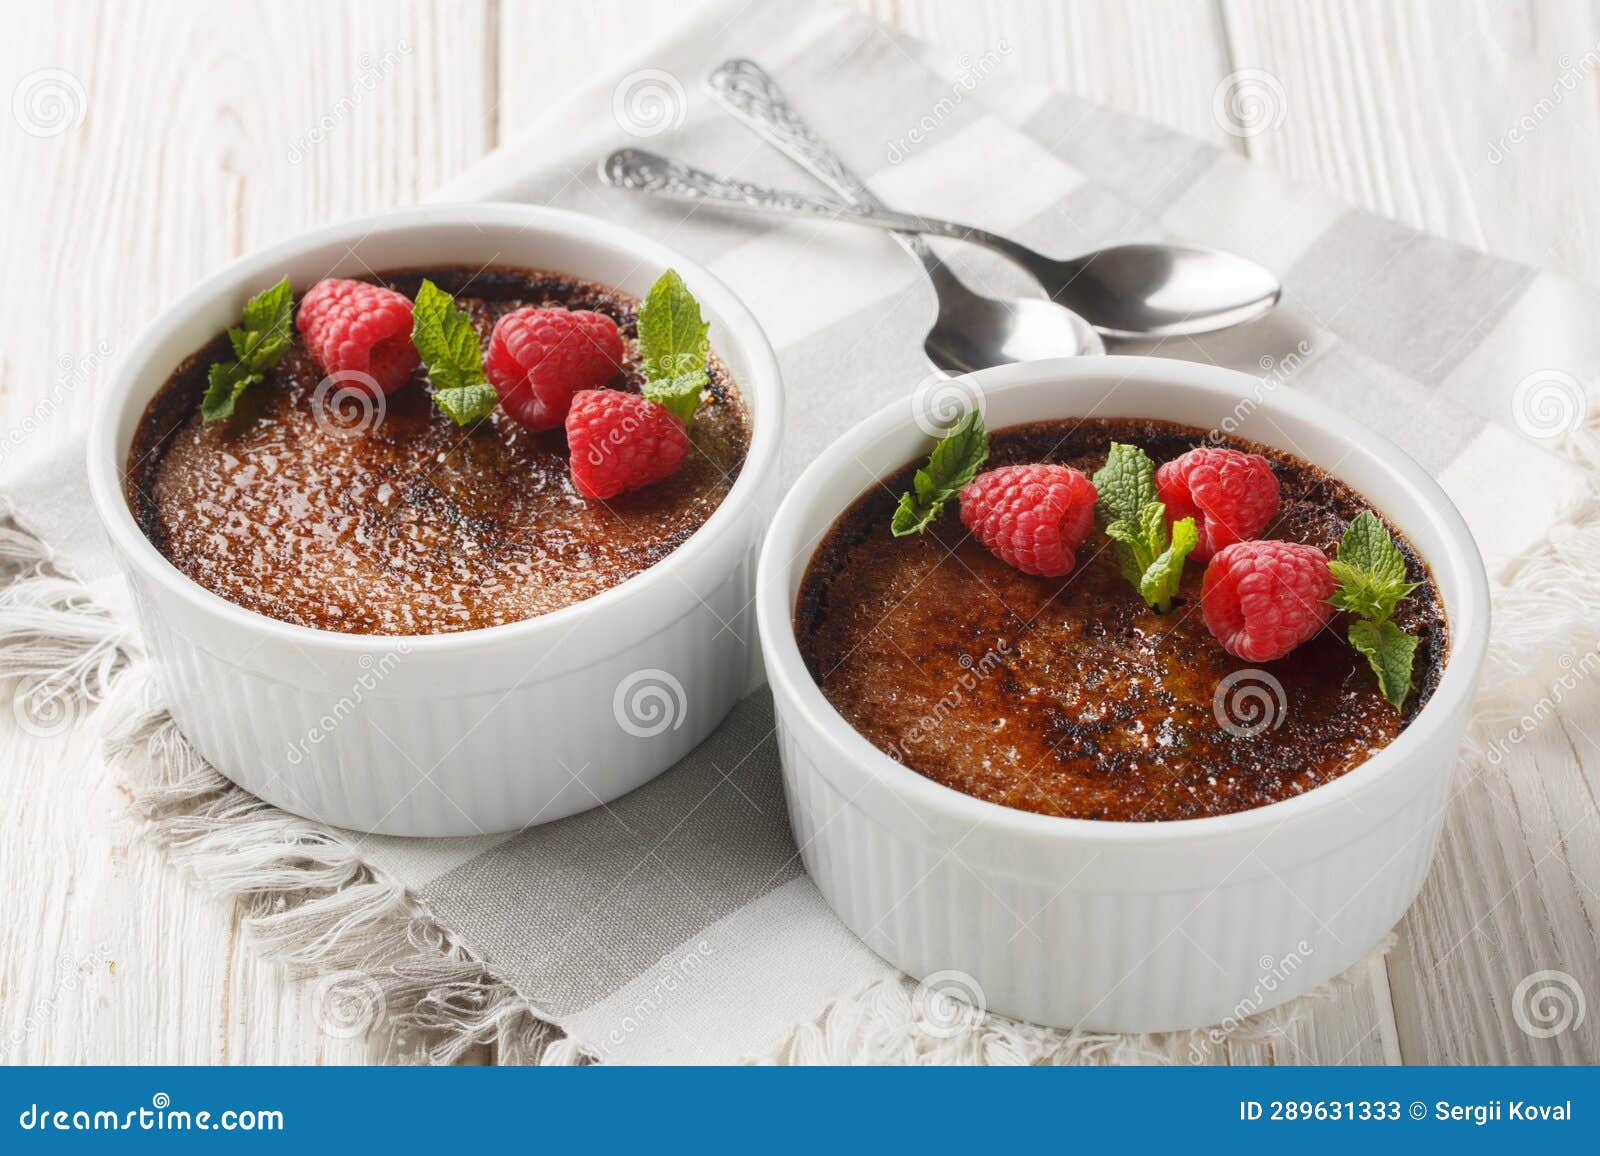 chocolate creme brulee dessert consisting of a rich custard base topped with a layer of hardened caramelized sugar close-up in a